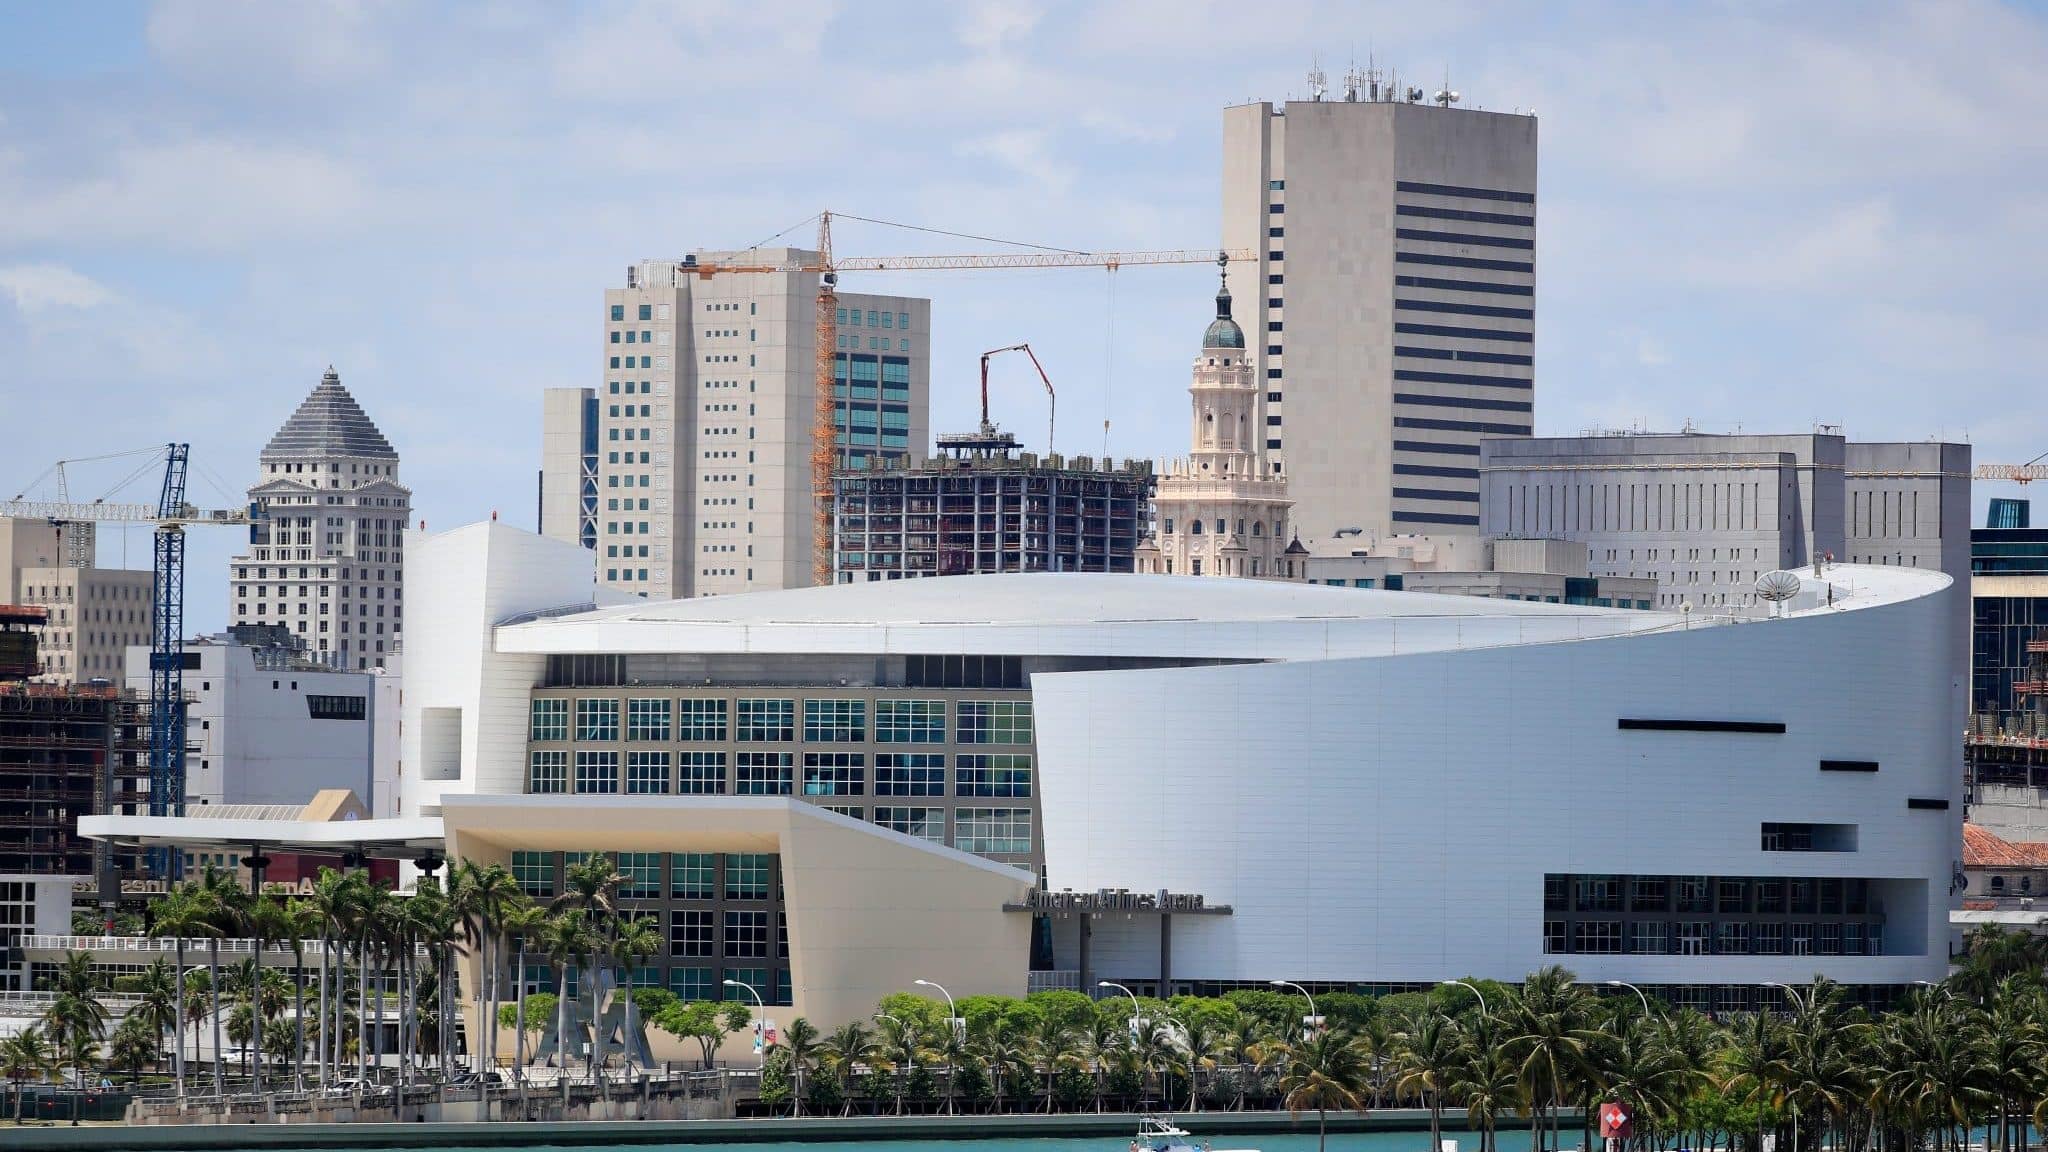 MIAMI, FLORIDA - MAY 08: A general view of the AmericanAirlines Arena is seen on May 08, 2020 in Miami Florida. According to reports the Miami Heat are looking to possibly reopen their facilities at the arena on May 11.